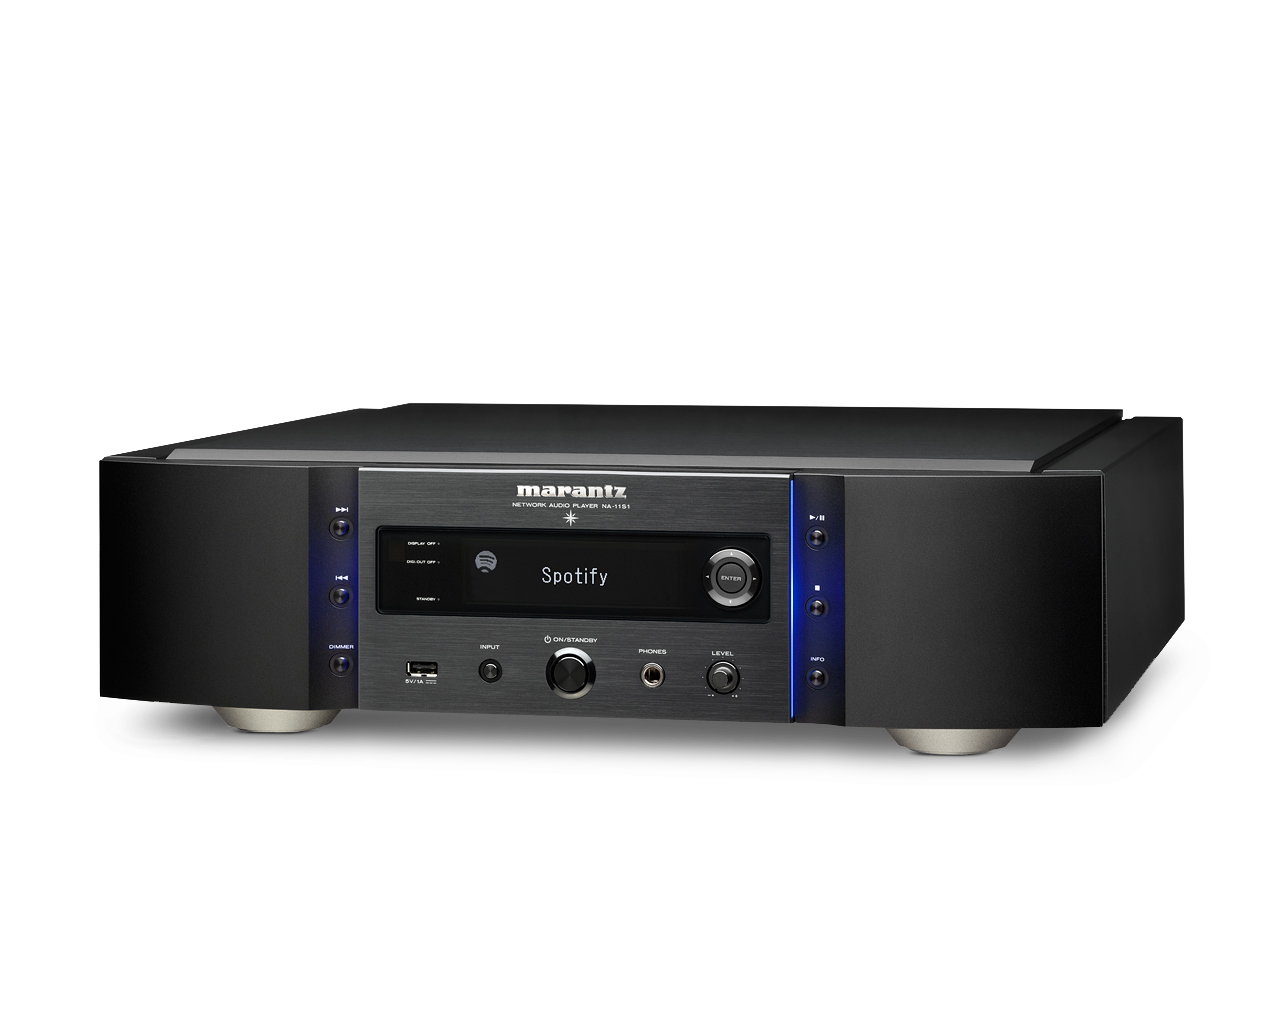 Marantz NA-11SI REFERENCE NETWORK PLAYER / DAC (USED)